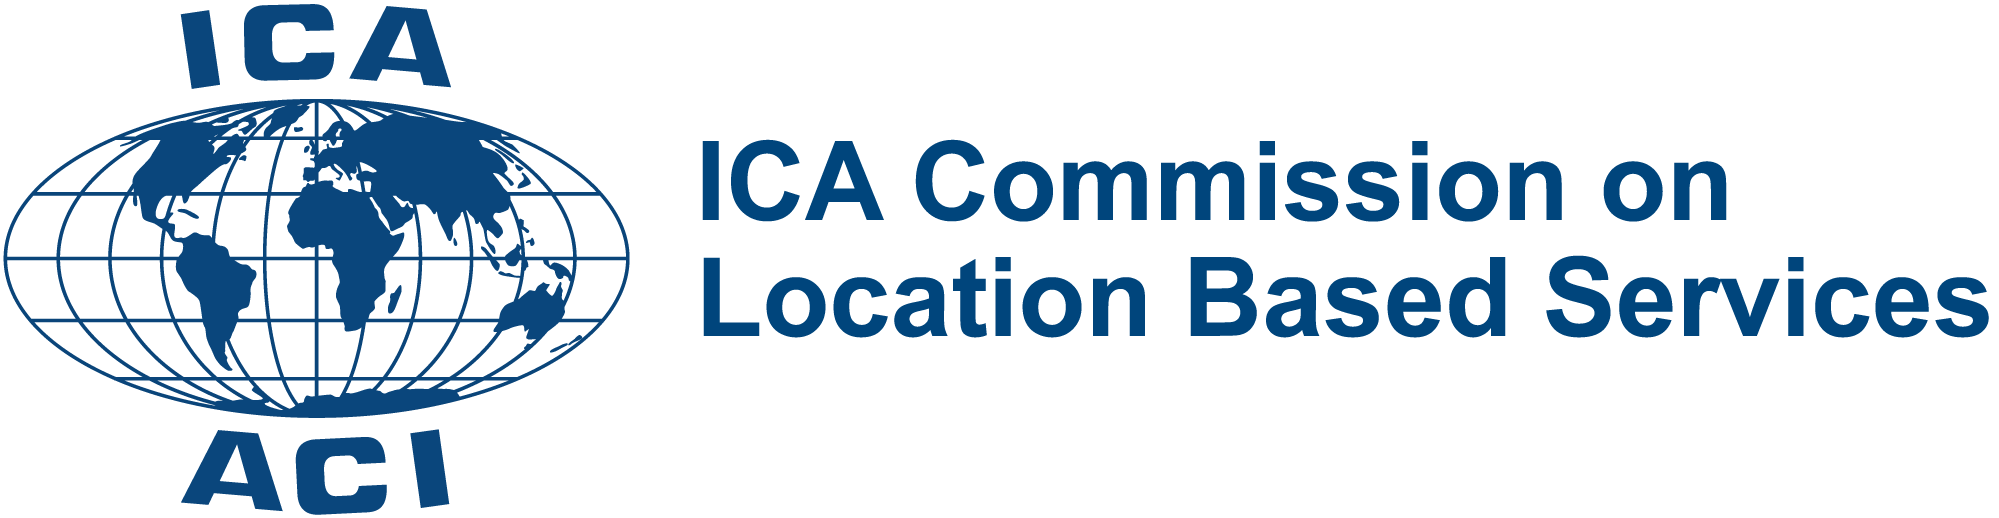 ICA Commission on Location-Based Services